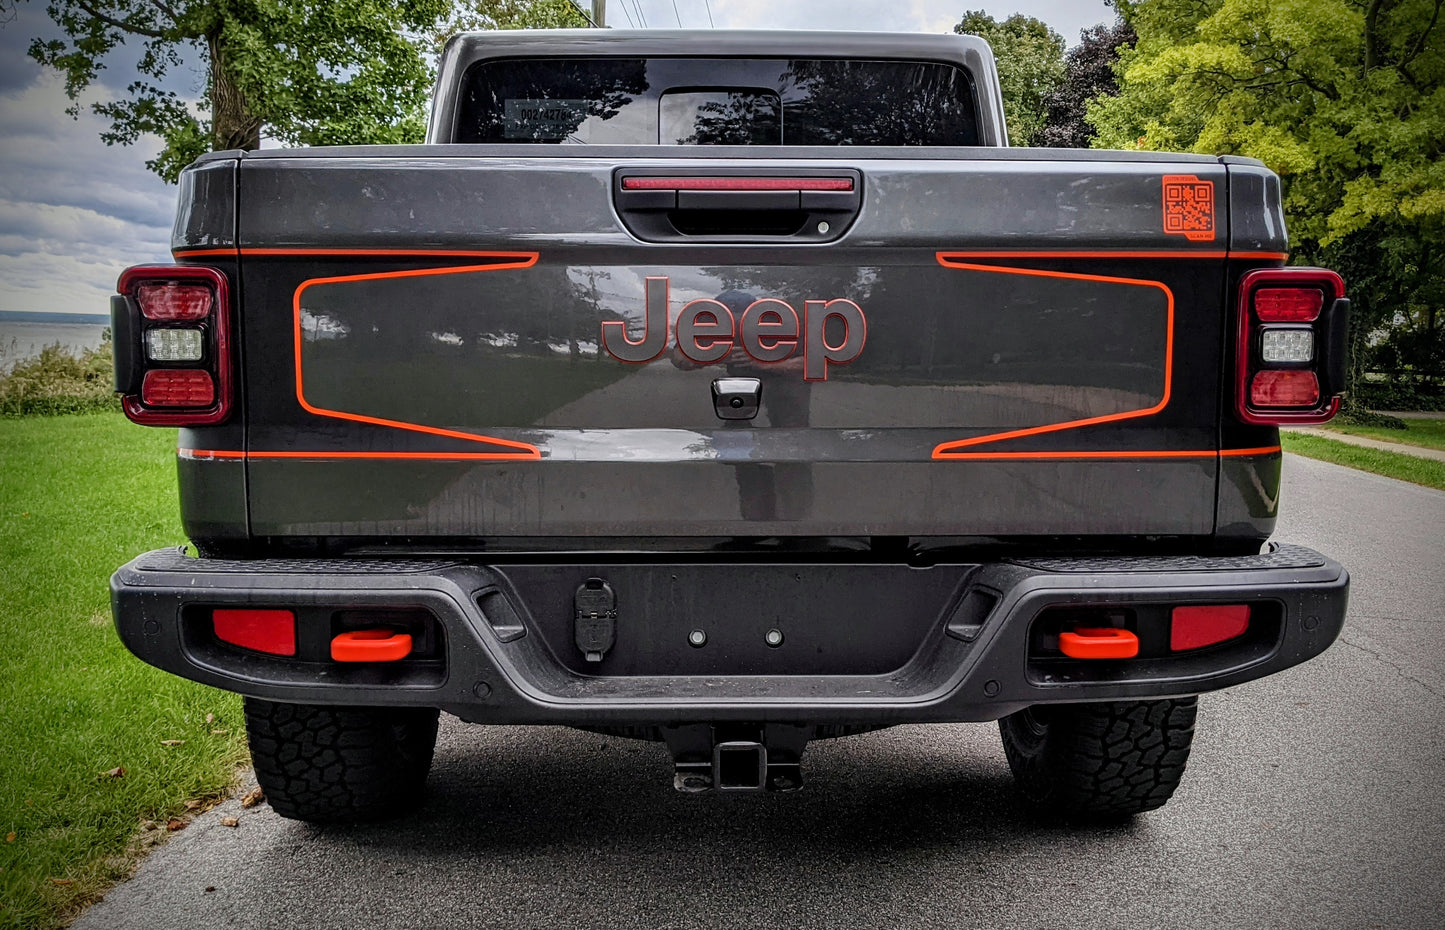 Pinstripe Color Line Rubicon Mojave Blackout tailgate decal set- fits 2020 and newer Jeep Gladiator